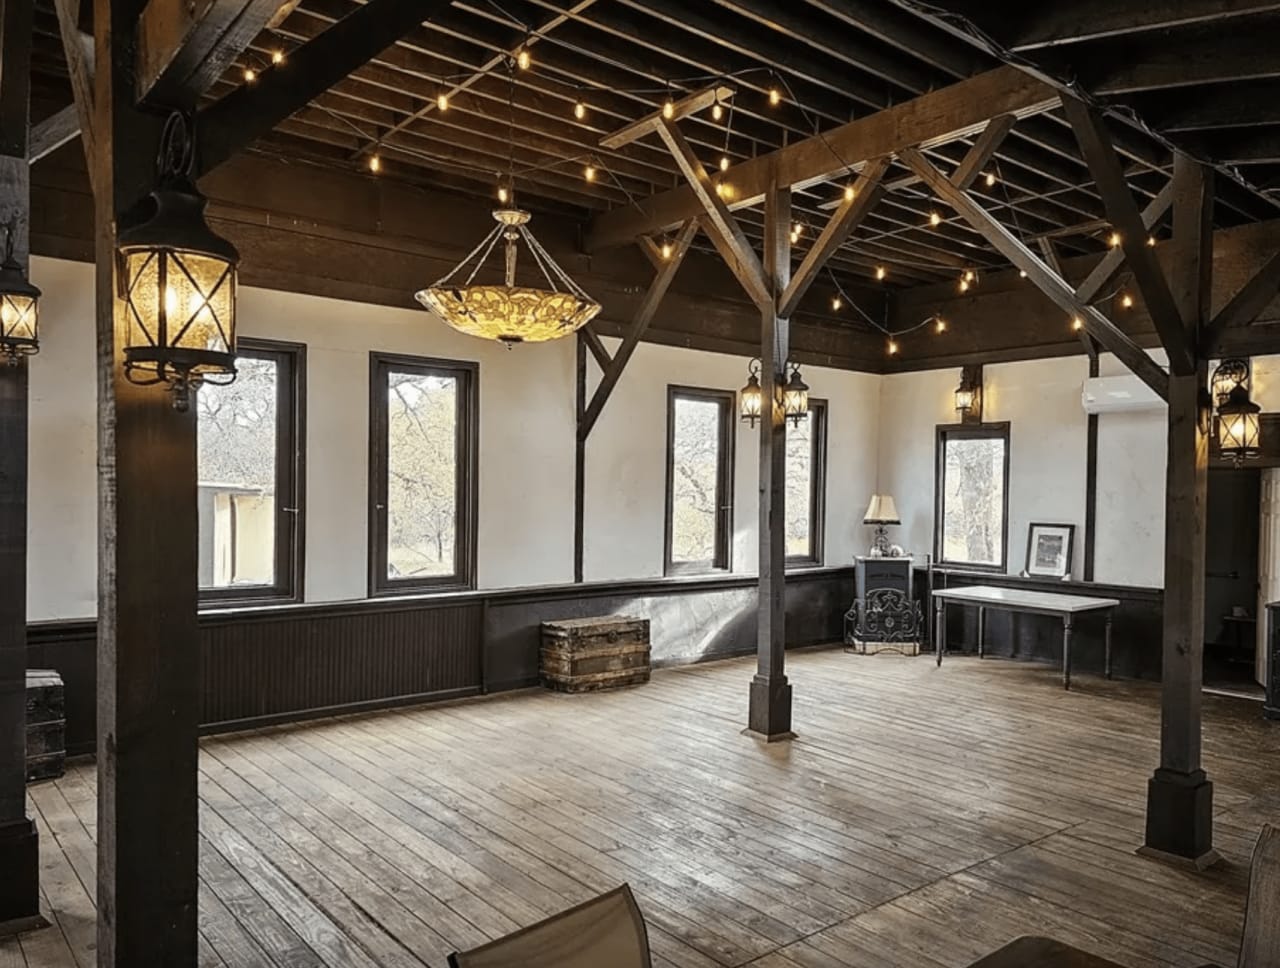 Exclusive Investment Opportunity - Event Venue with Lodging in Fredericksburg, Tx